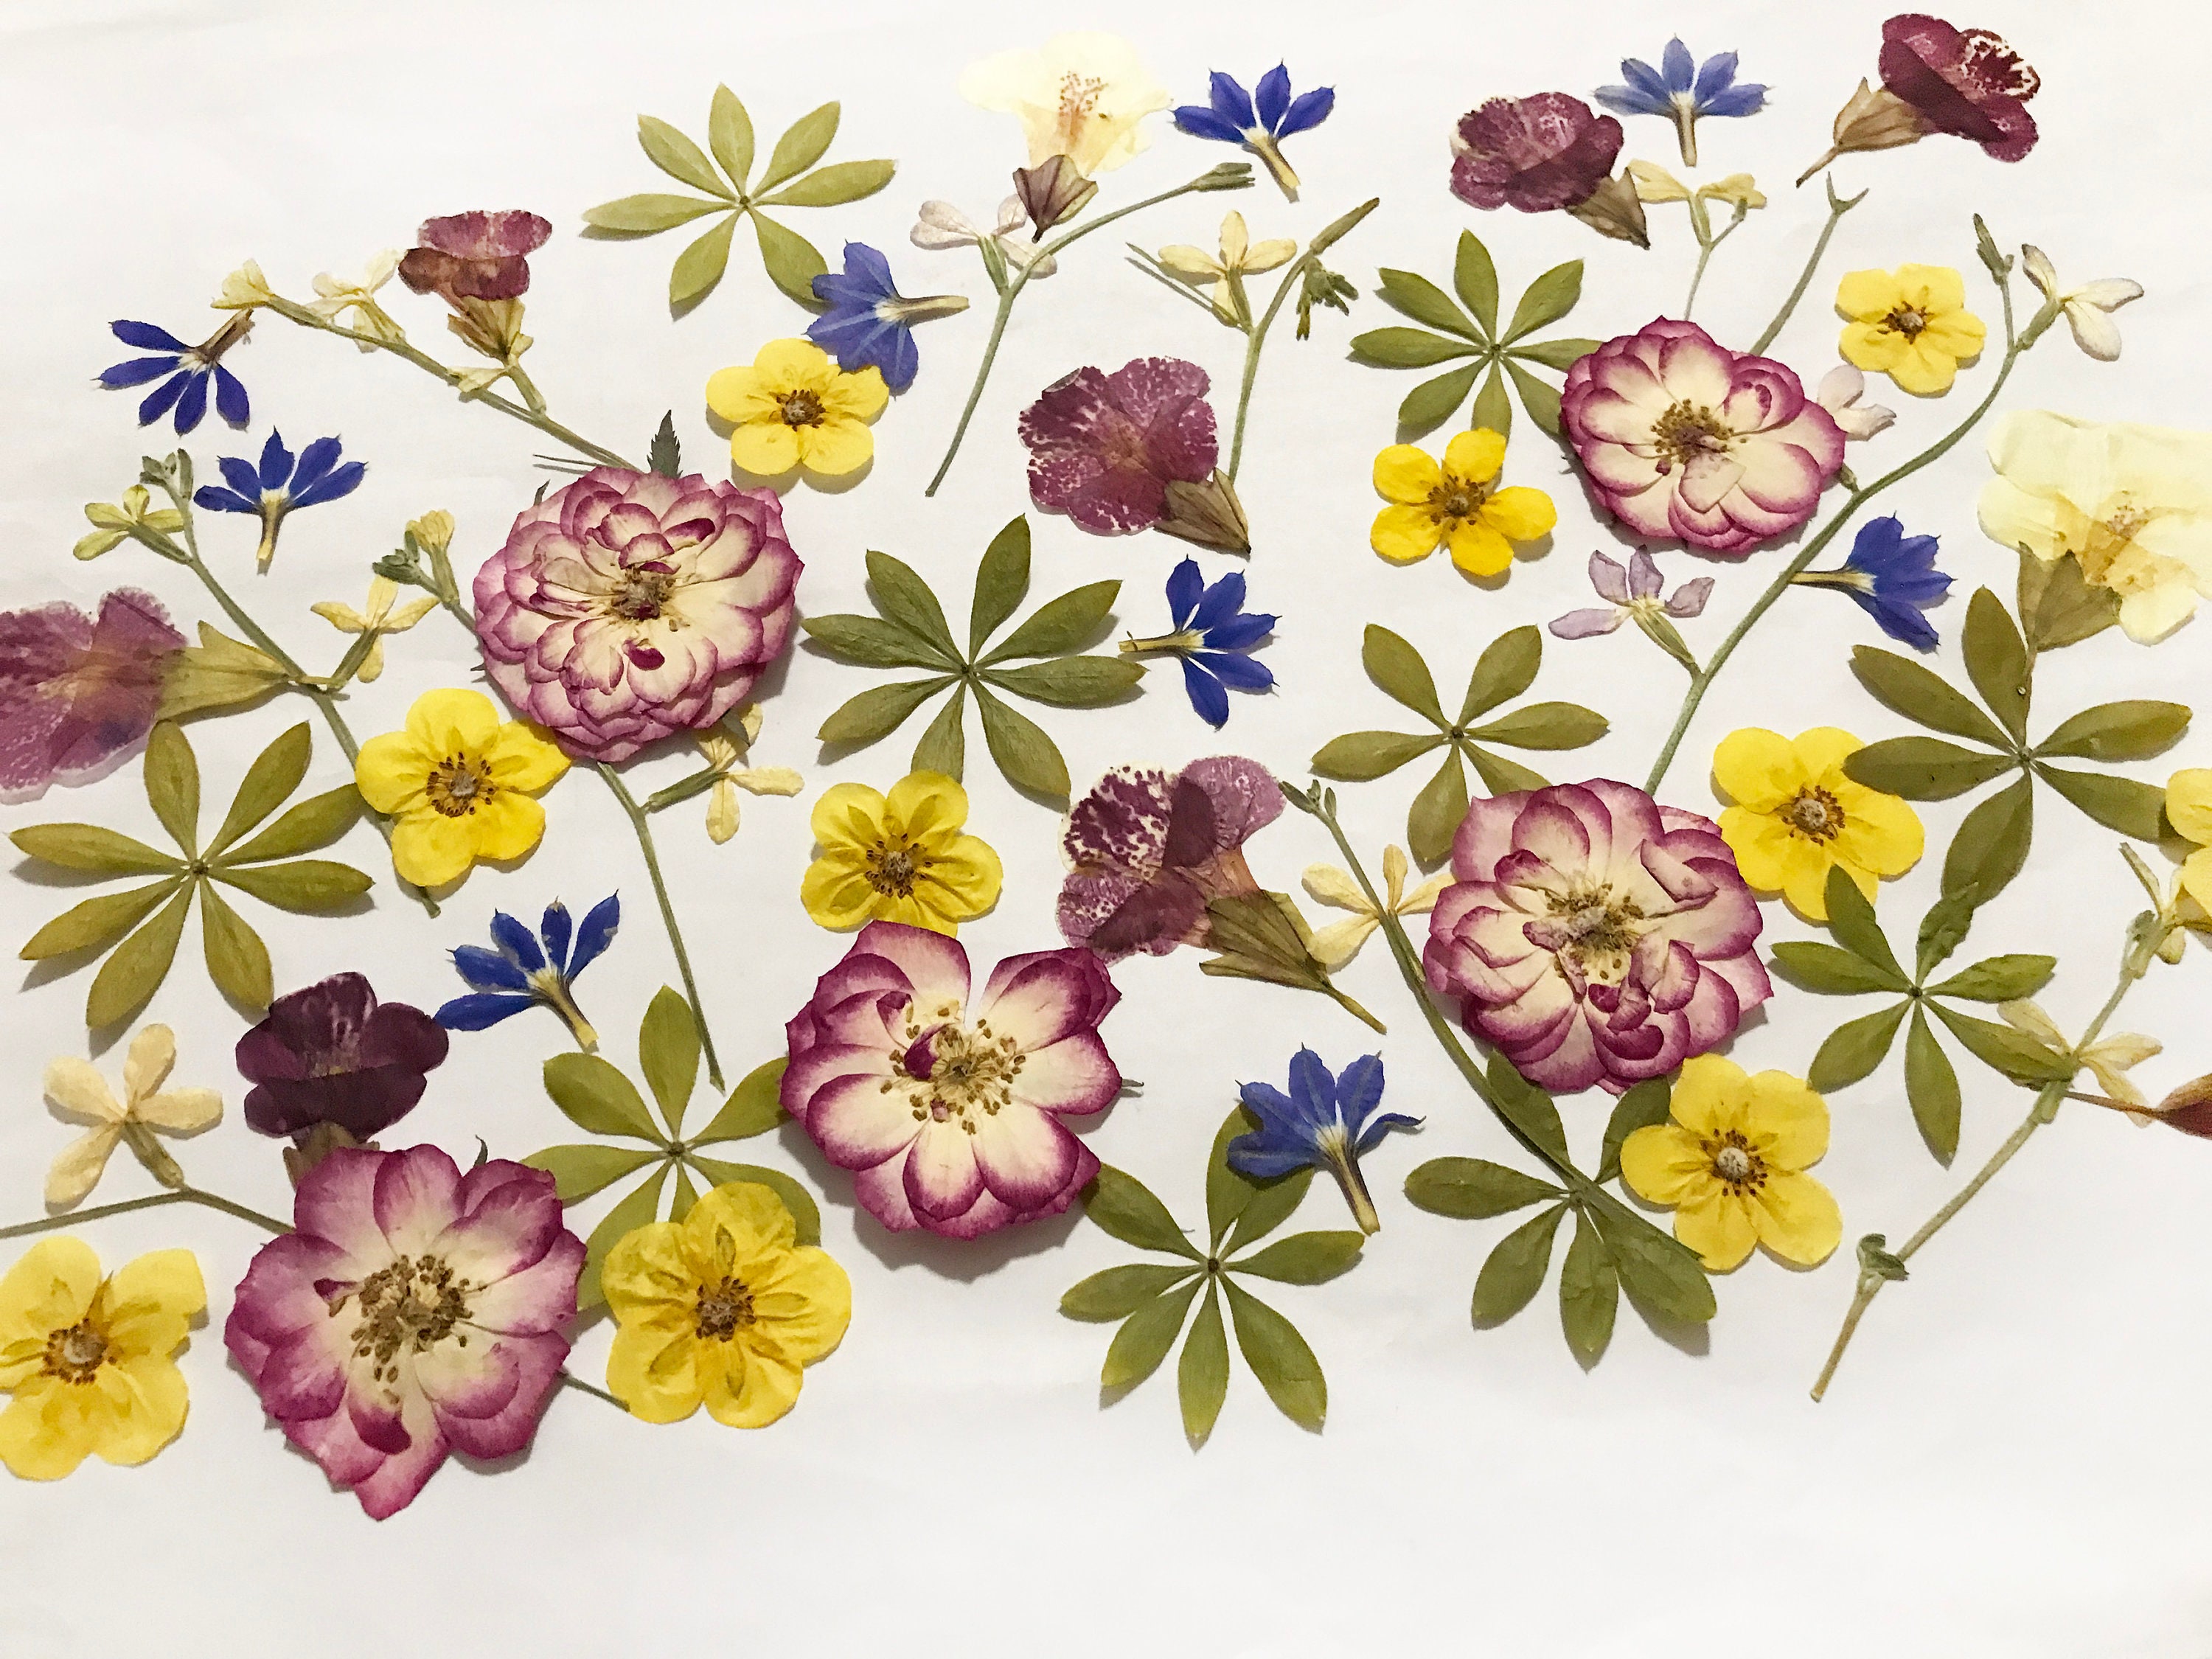 50 Mixed Pressed Flowers Edible Flowers for Cake Decorations, Crafts,  Flower Arts DF047-4 